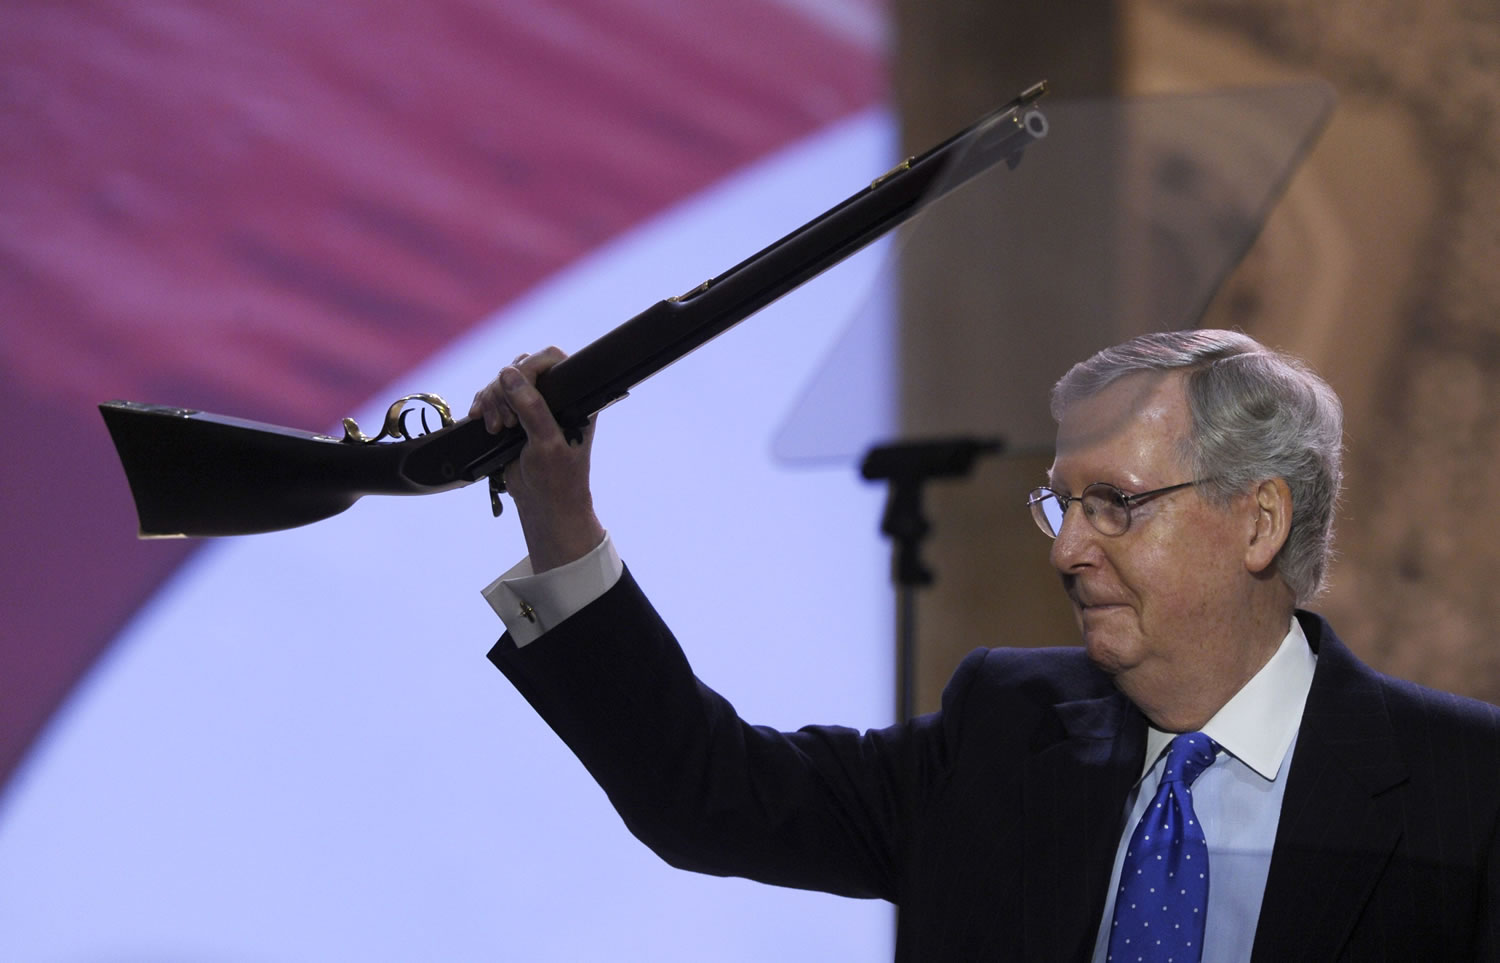 Senate Minority Leader Mitch McConnell of Kentucky walks onto the stage holding a rifle before speaking at the Conservative Political Action Committee annual conference at National Harbor, Md., on Thursday.